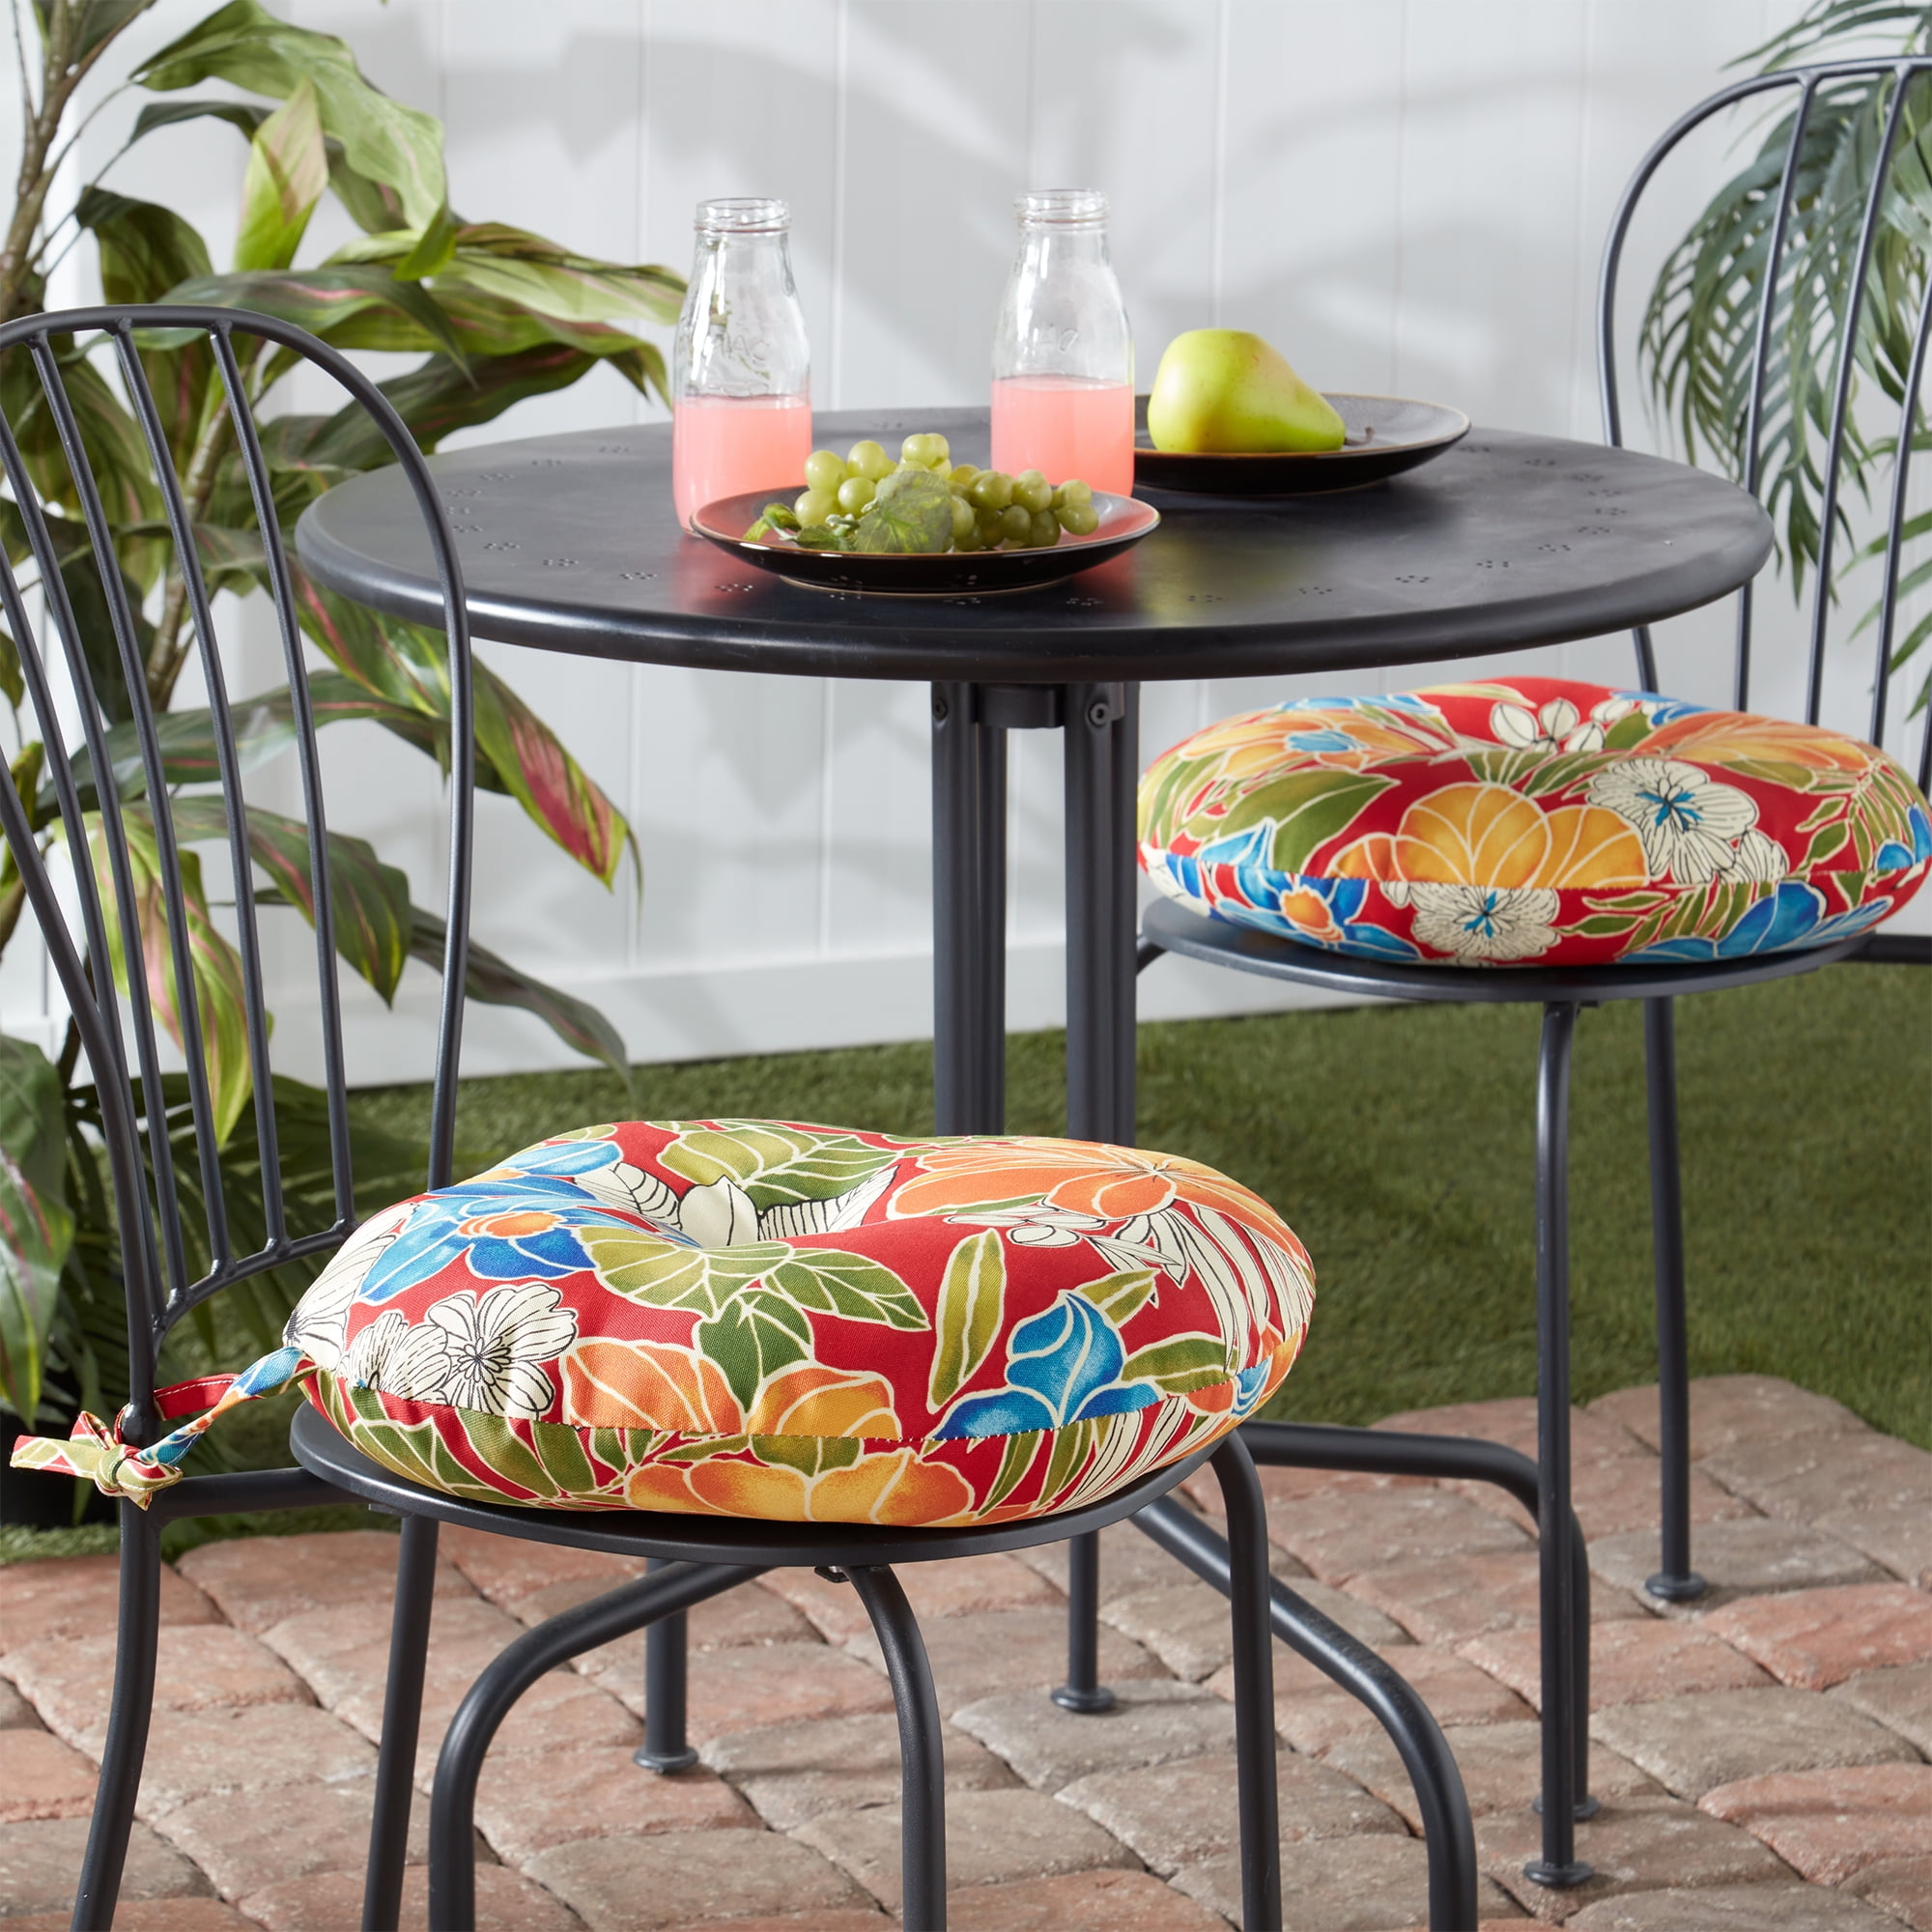 Greendale Home Fashions 15 Round Outdoor Bistro Chair Cushion (Set of 2), Sunset Stripe